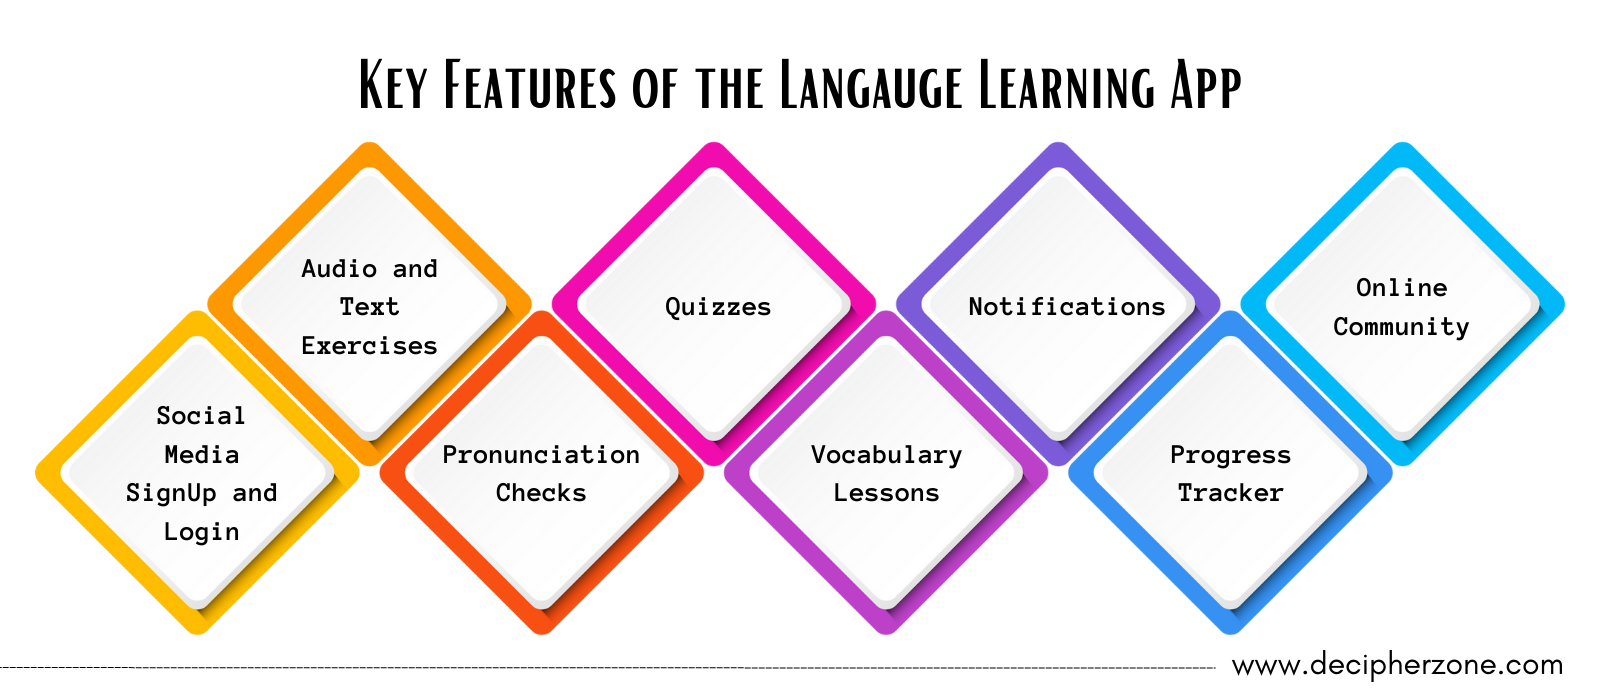 Key Features of the Language Learning App